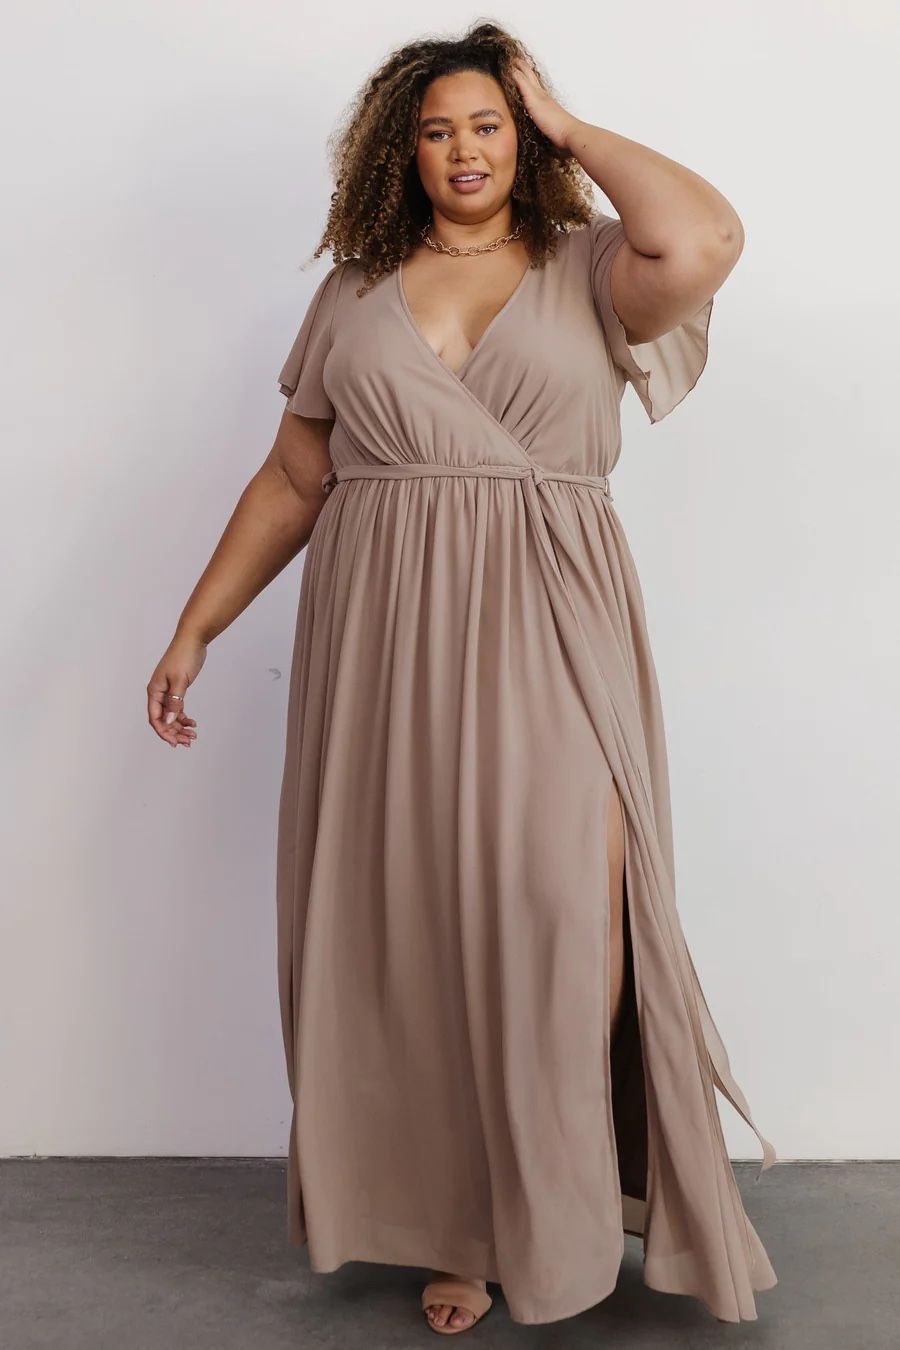 Baltic Born Dress - Taupe Spring/Summer/Wedding/Any Occasion